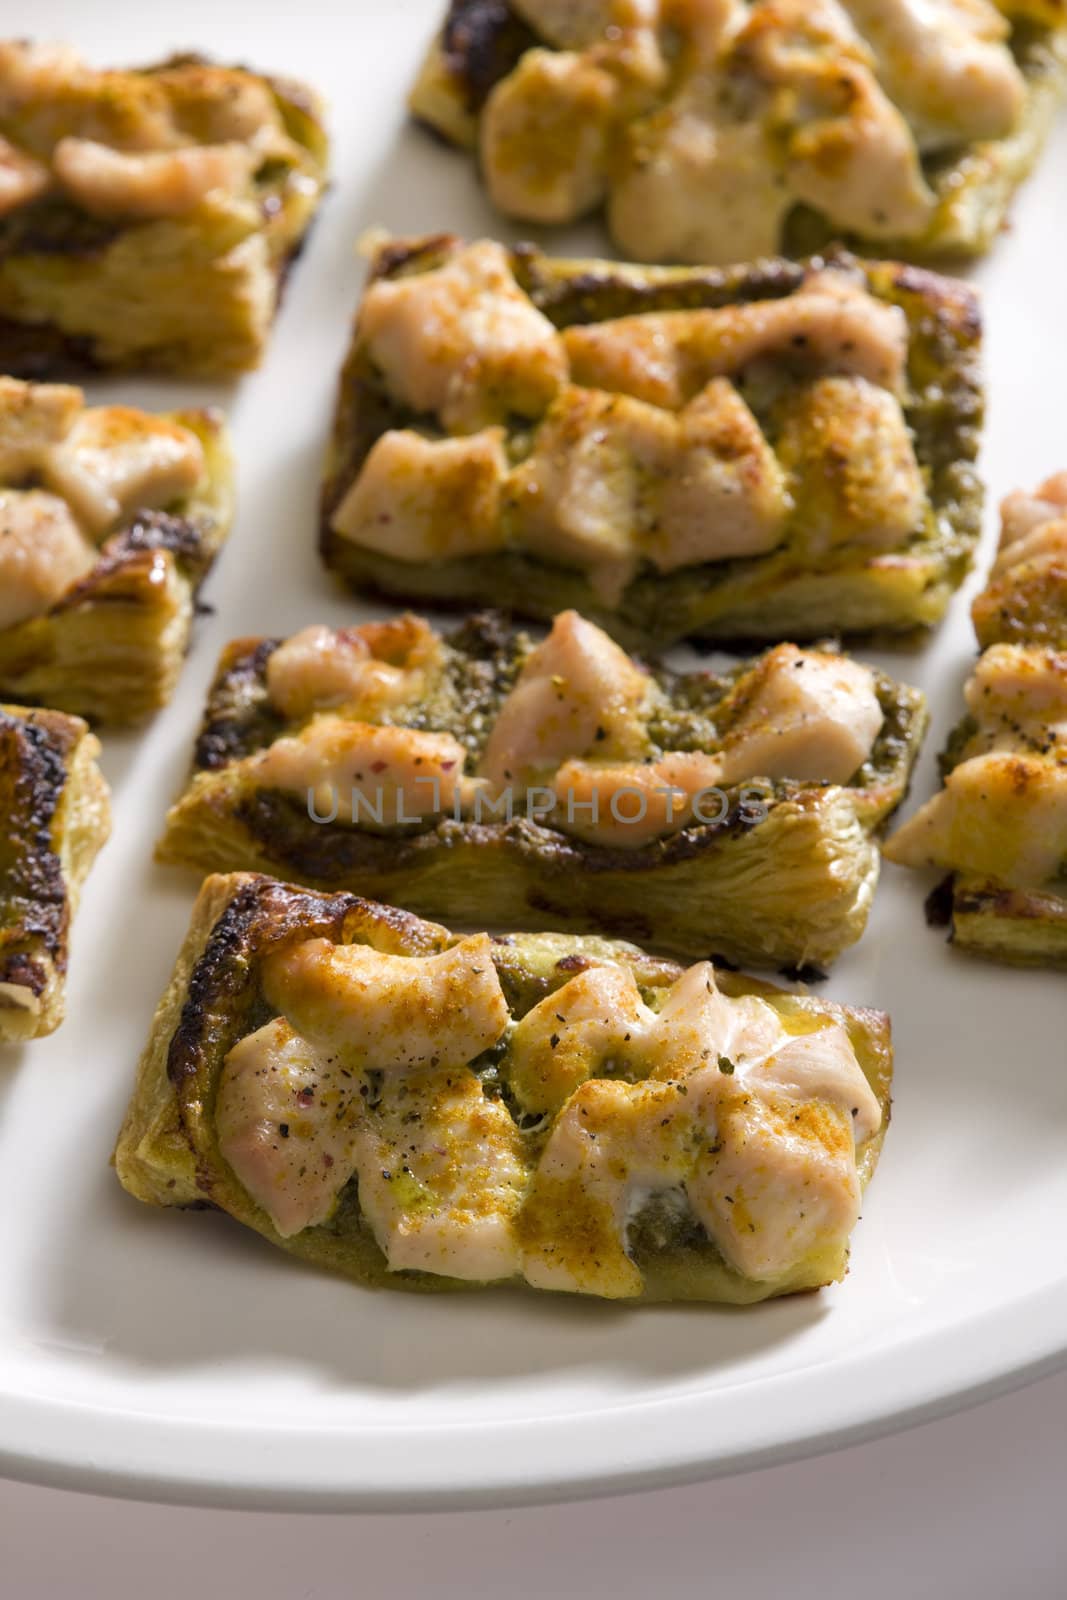 baked chicken meat with pesto on puff